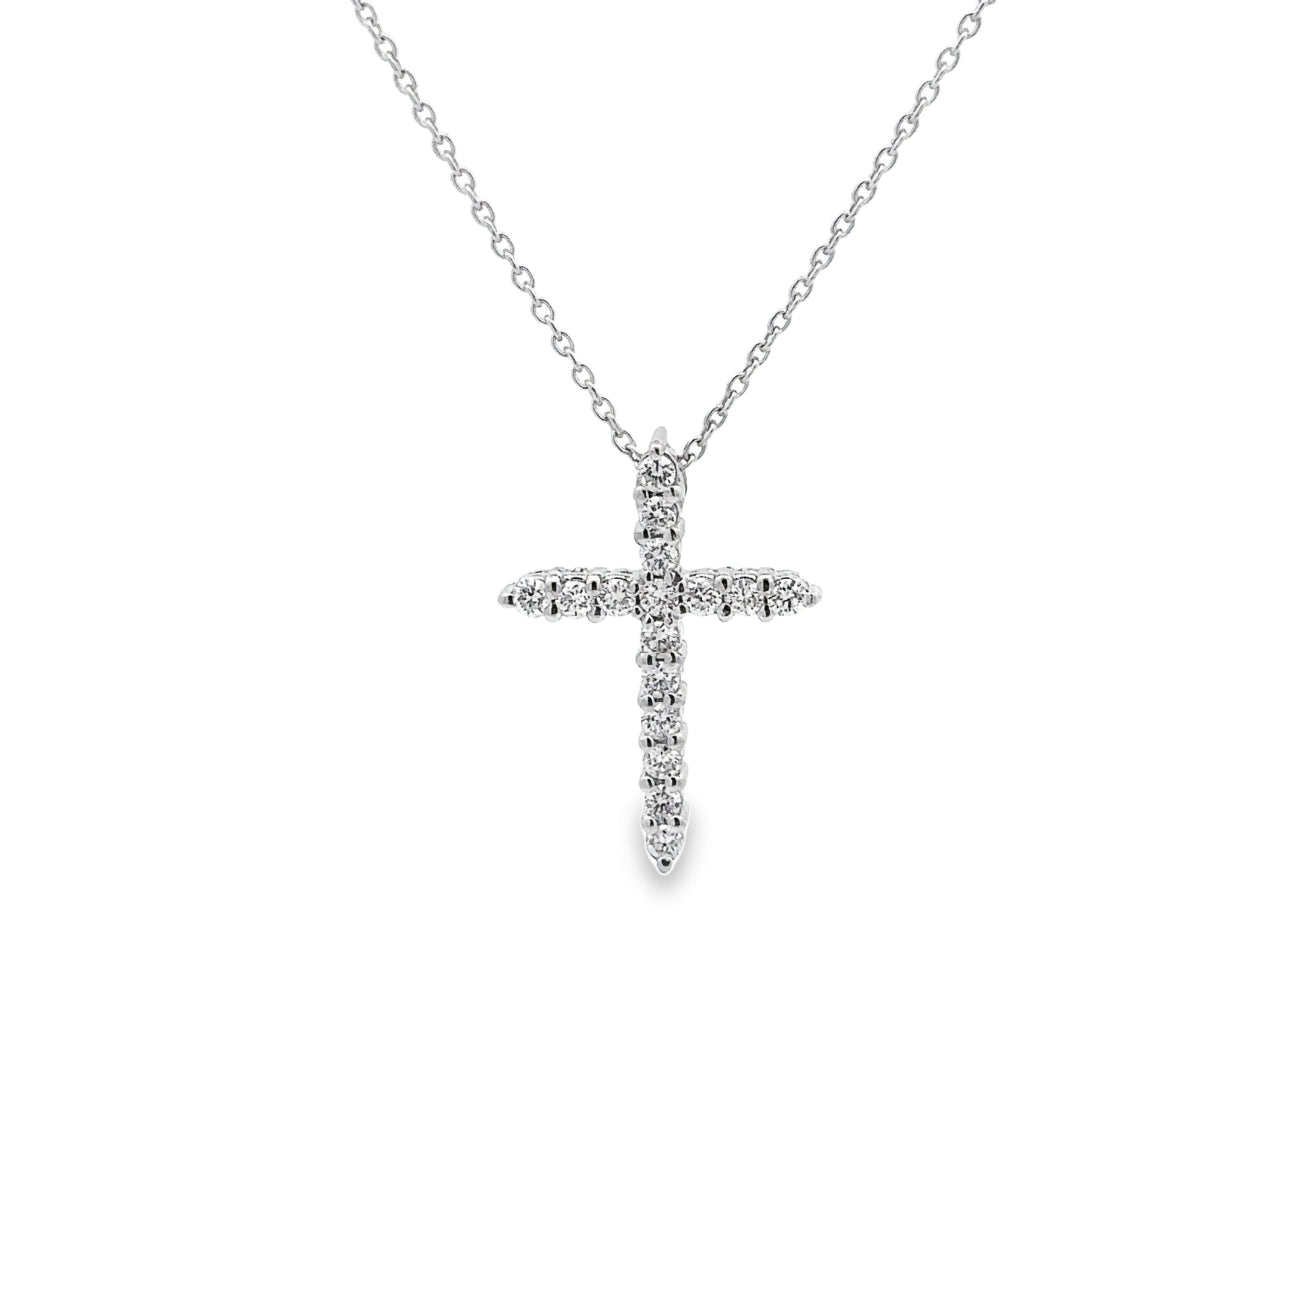 WD1319 White Gold and Diamond Necklace